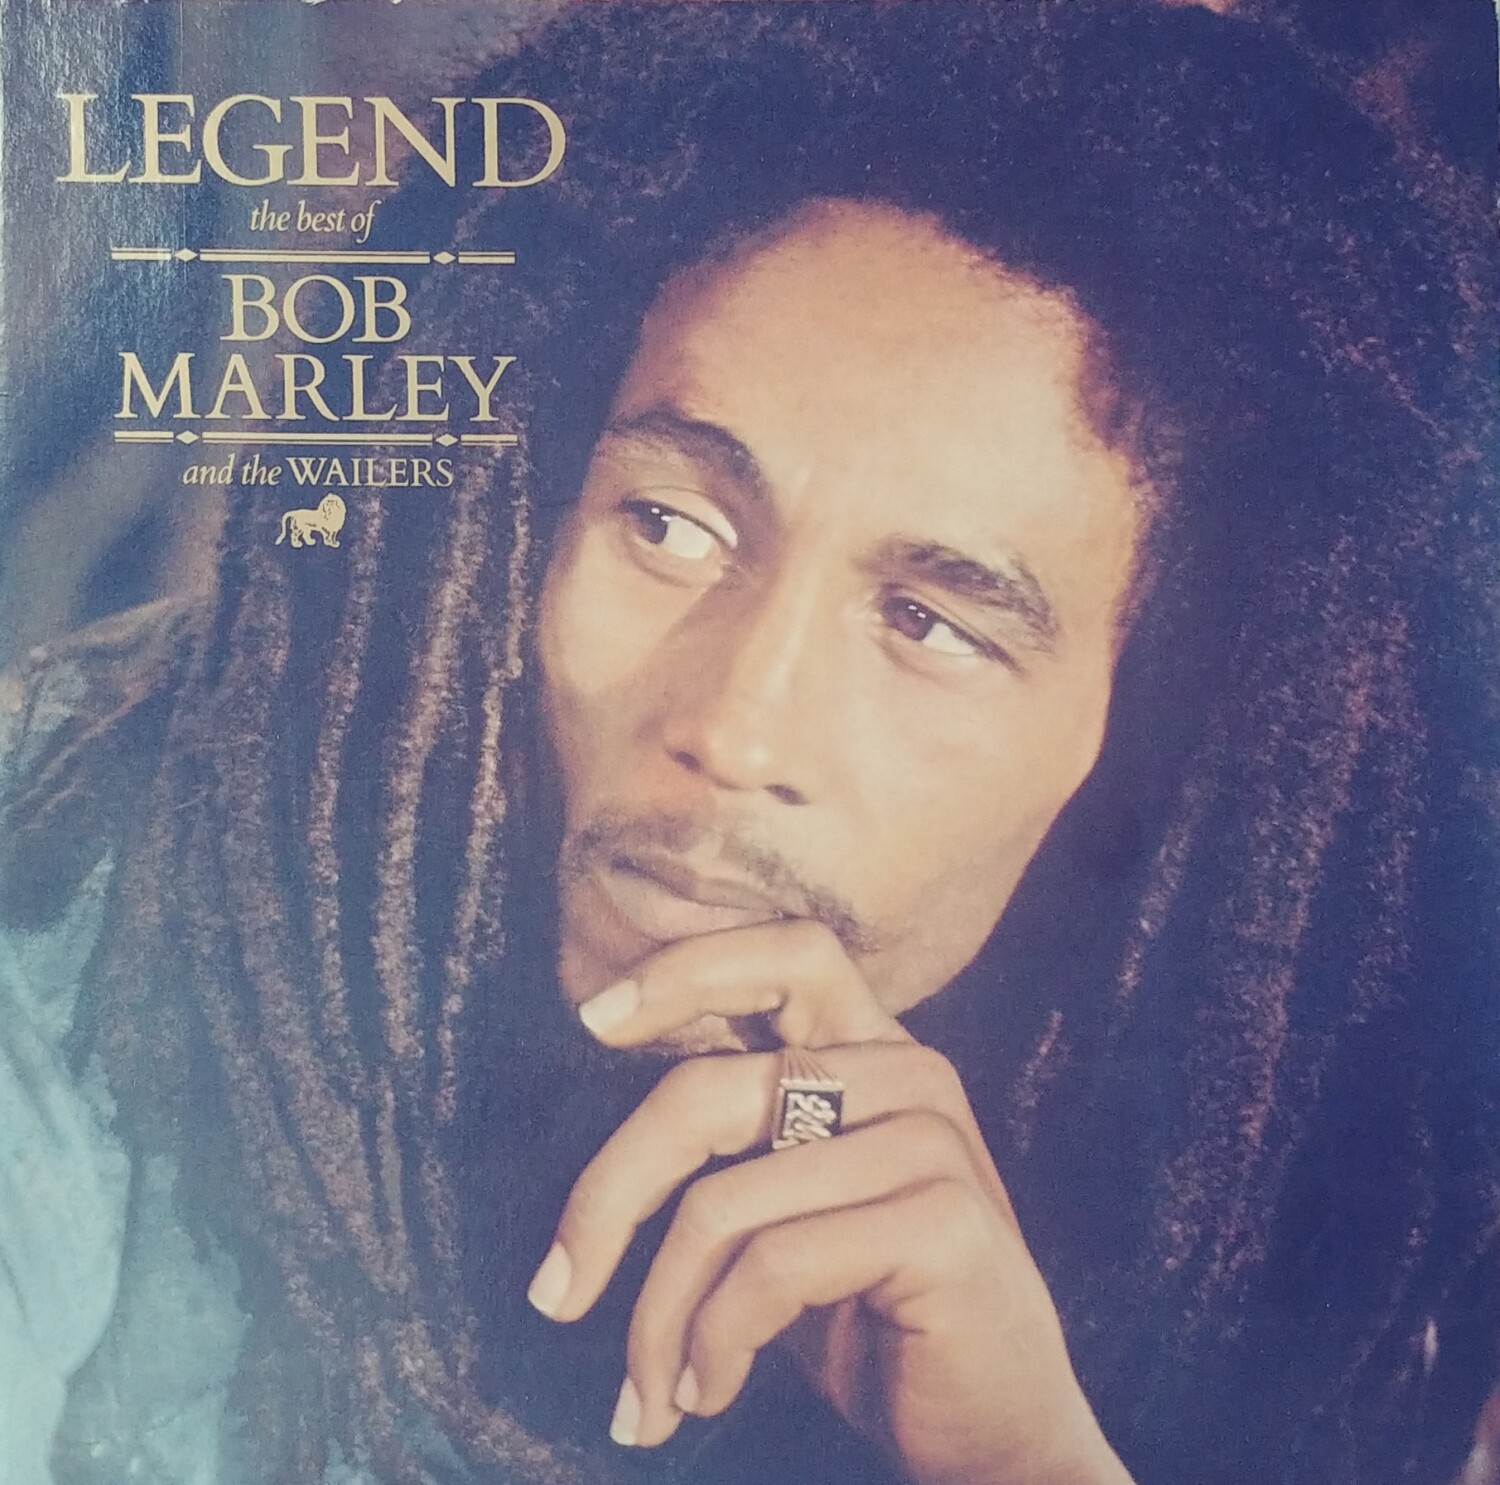 Bob Marley & The Wailers - Legend The Best of